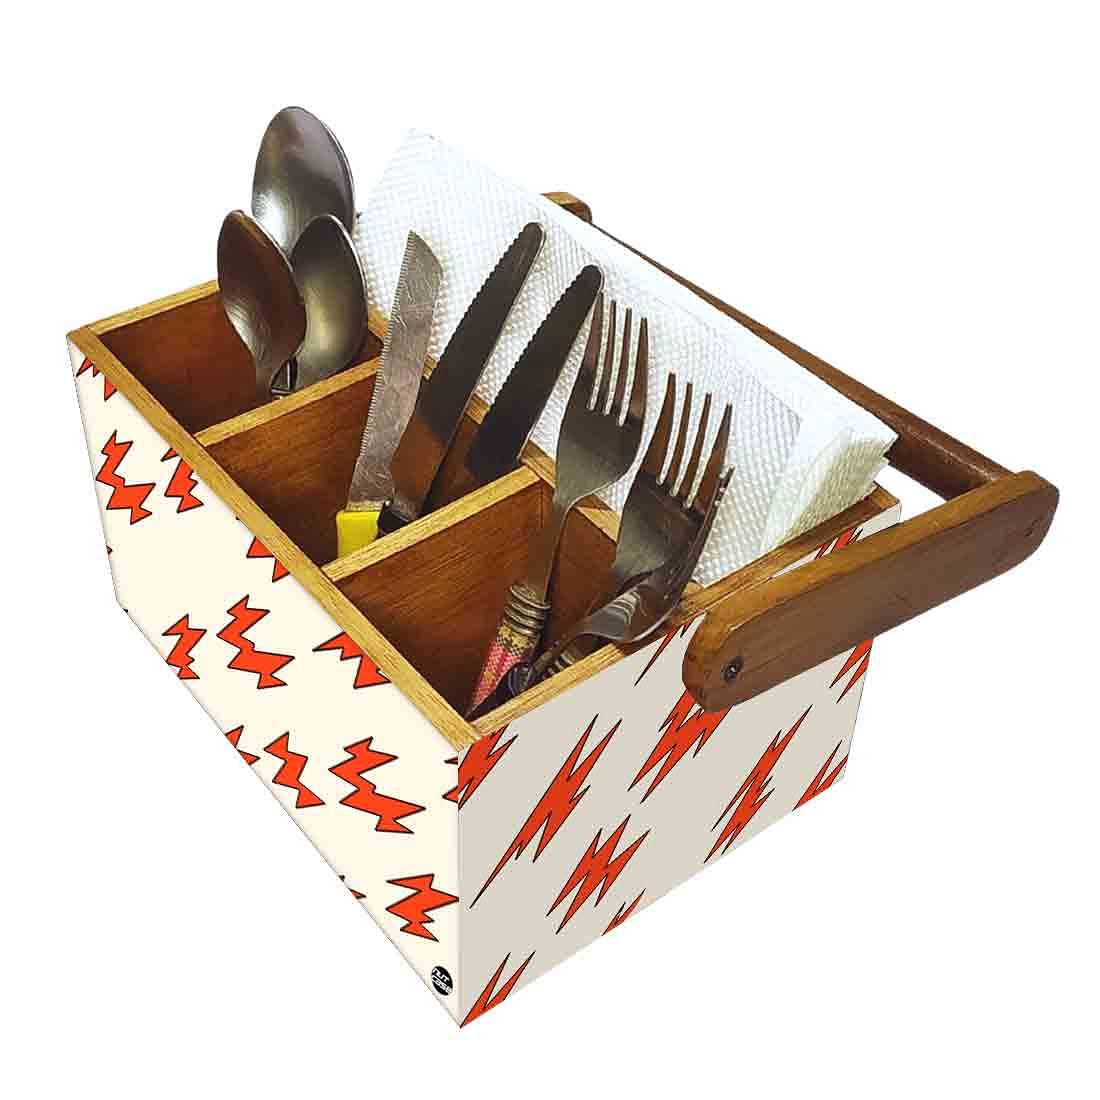 Spoon Stand for Dining Table Forks Knives Tissue Organizer - Red Flash Nutcase